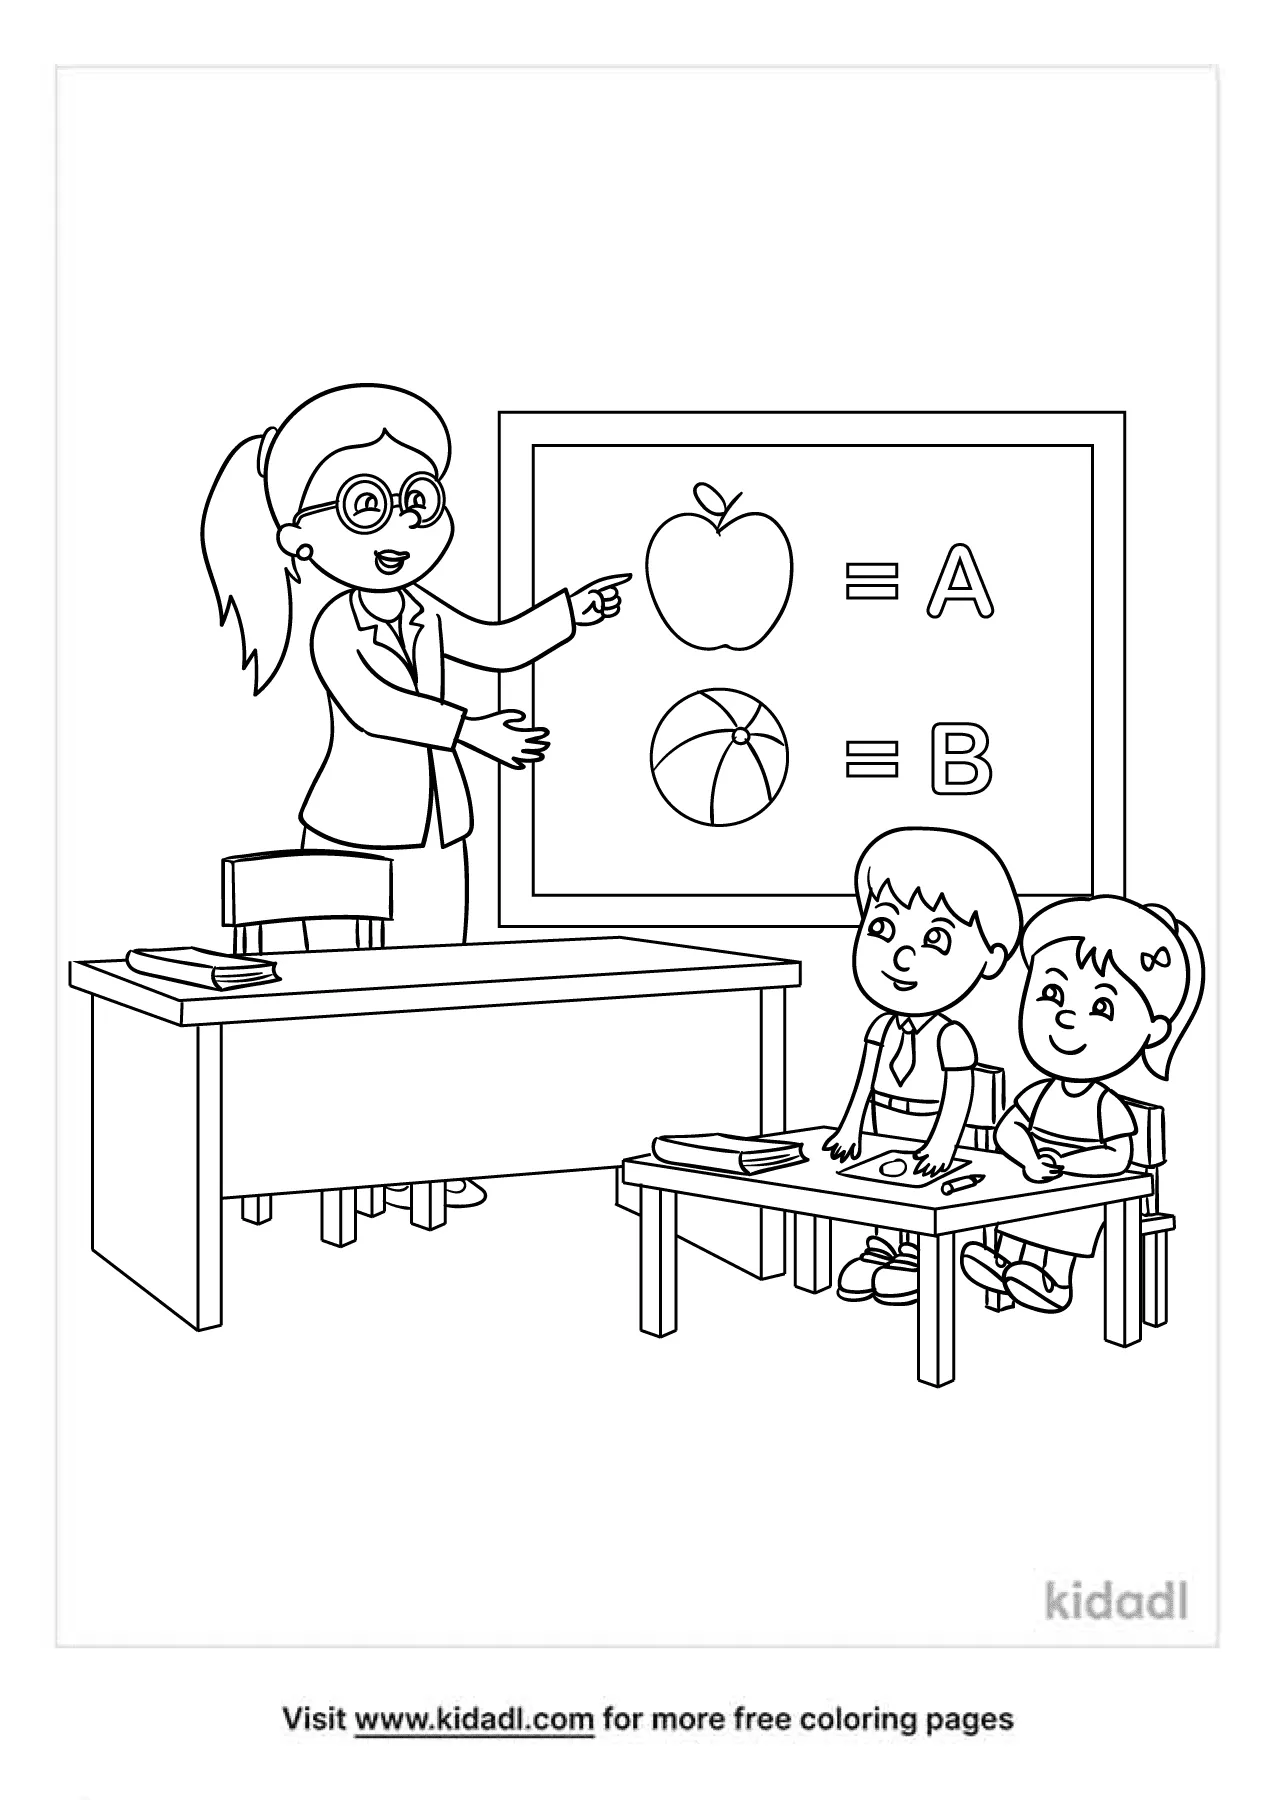 Free Classroom Coloring Page | Coloring Page Printables | Kidadl